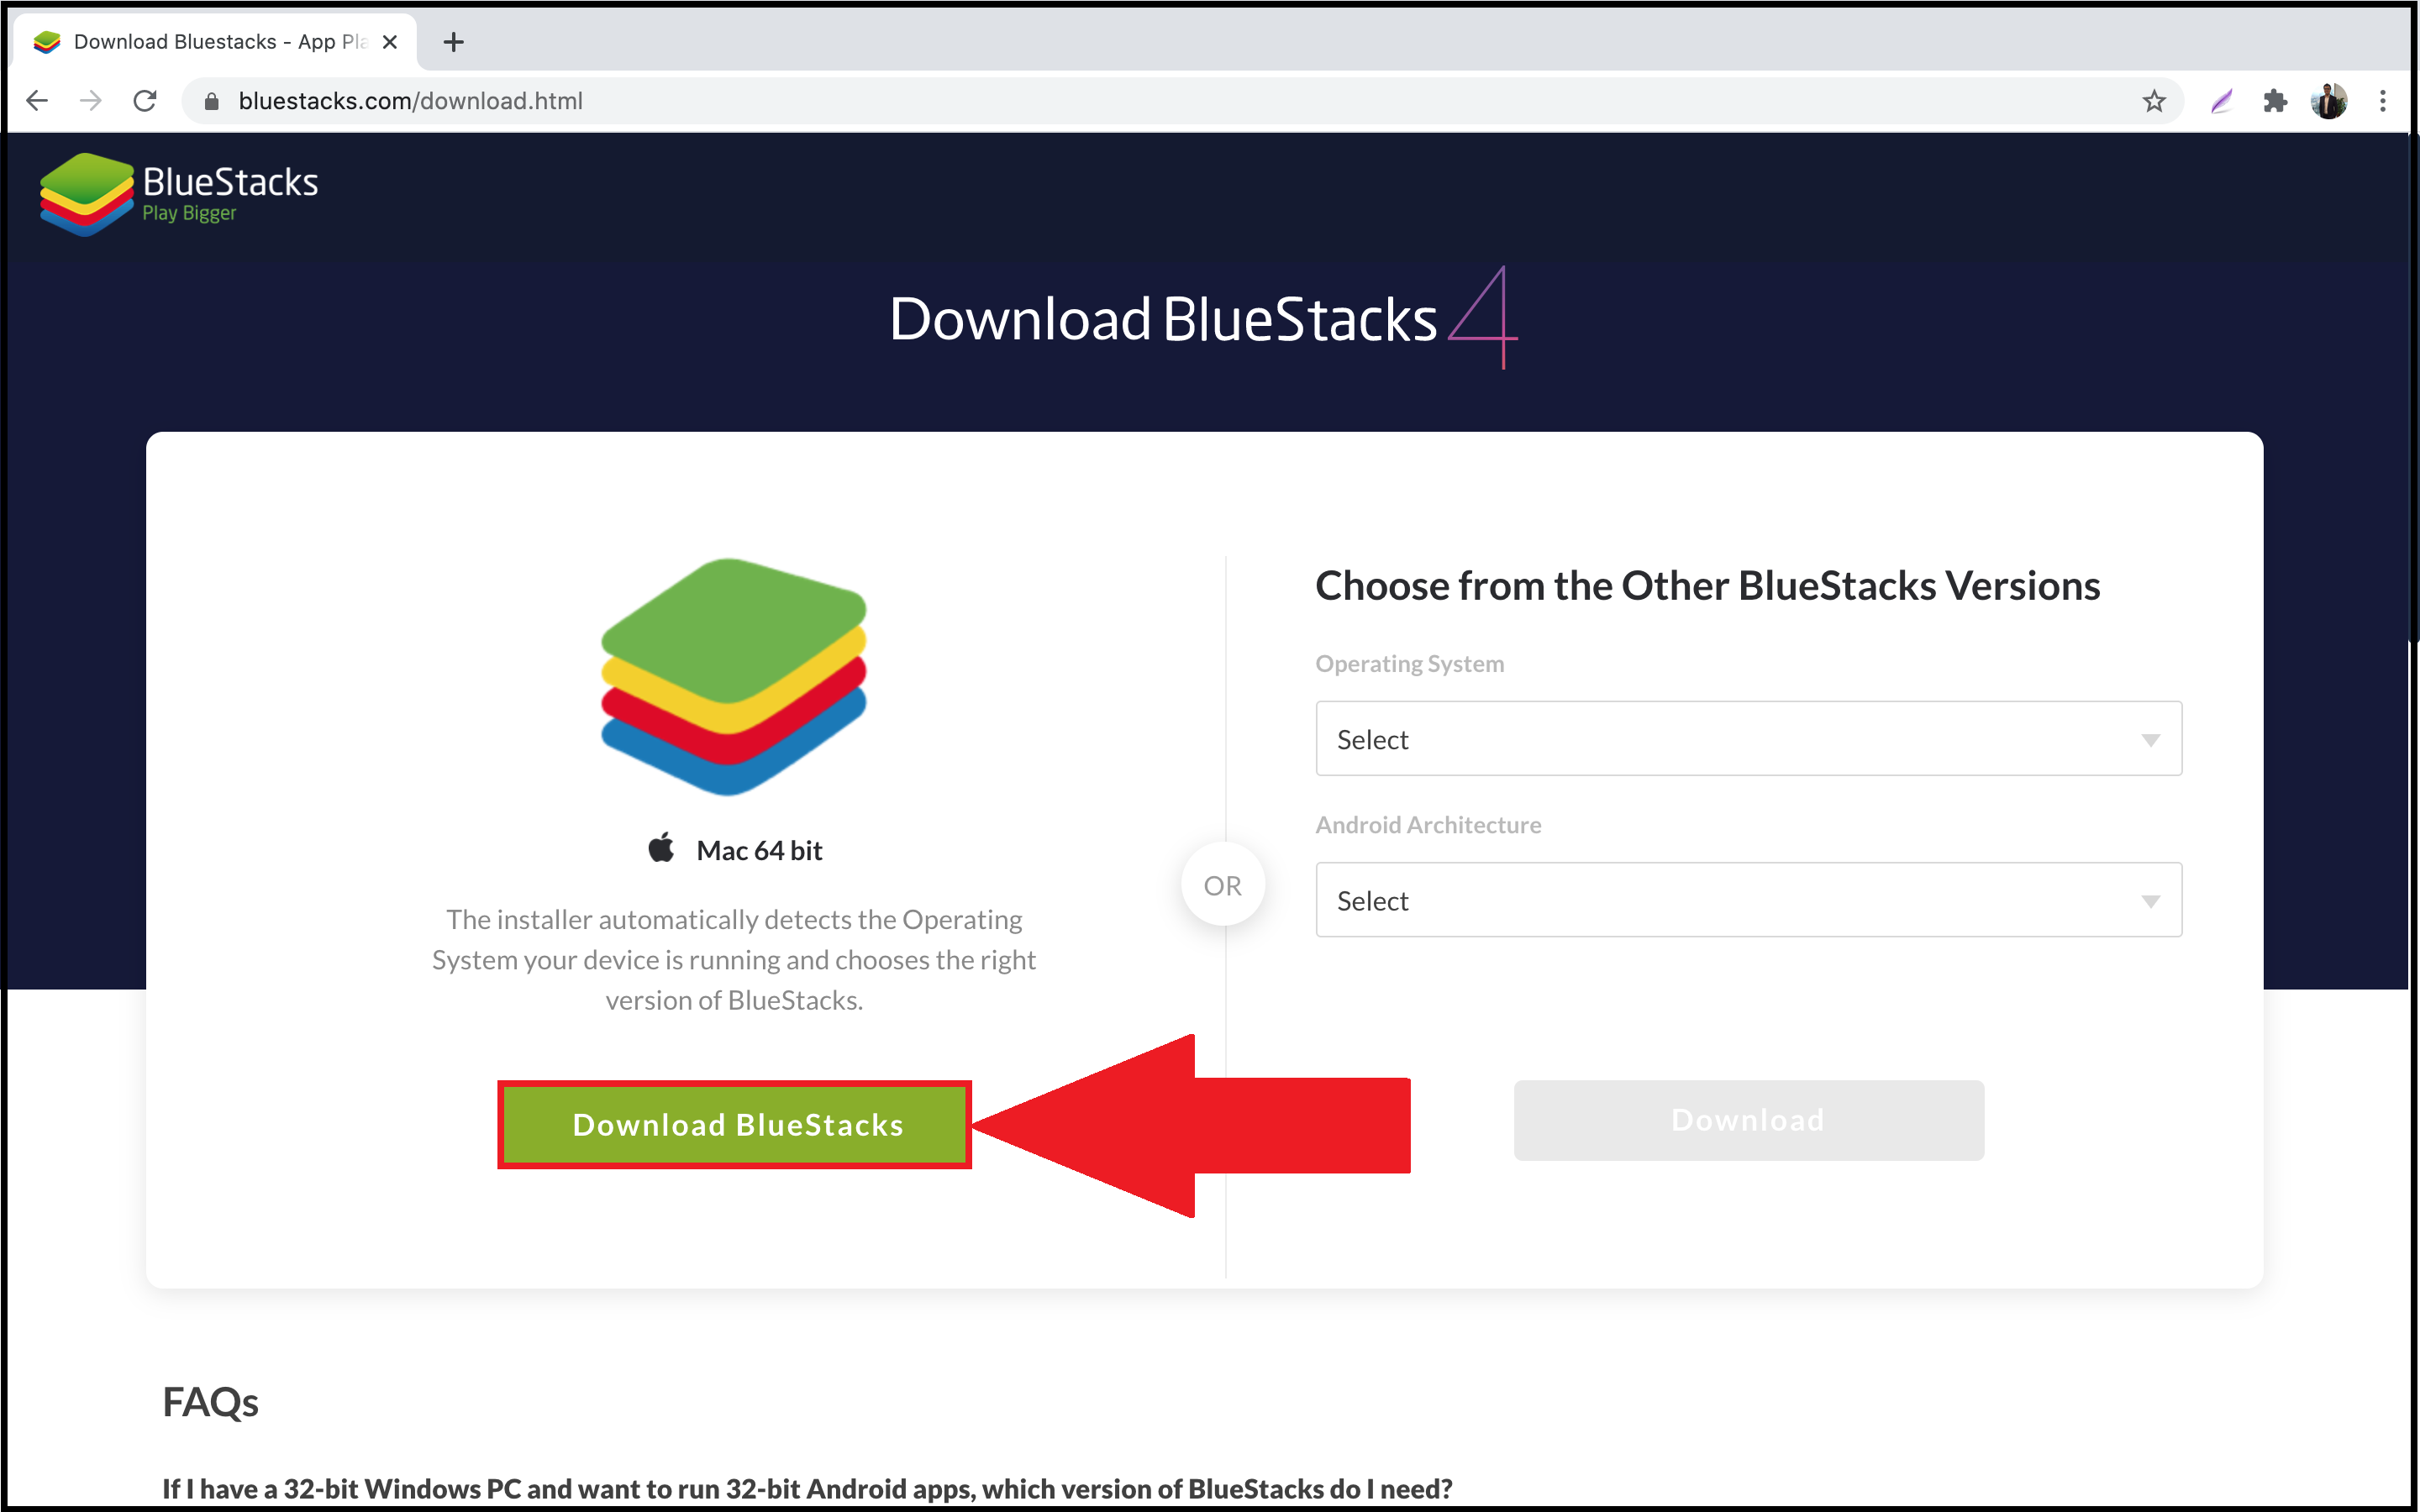 What Is The Mac Address For Bluestacks - tripsdarelo